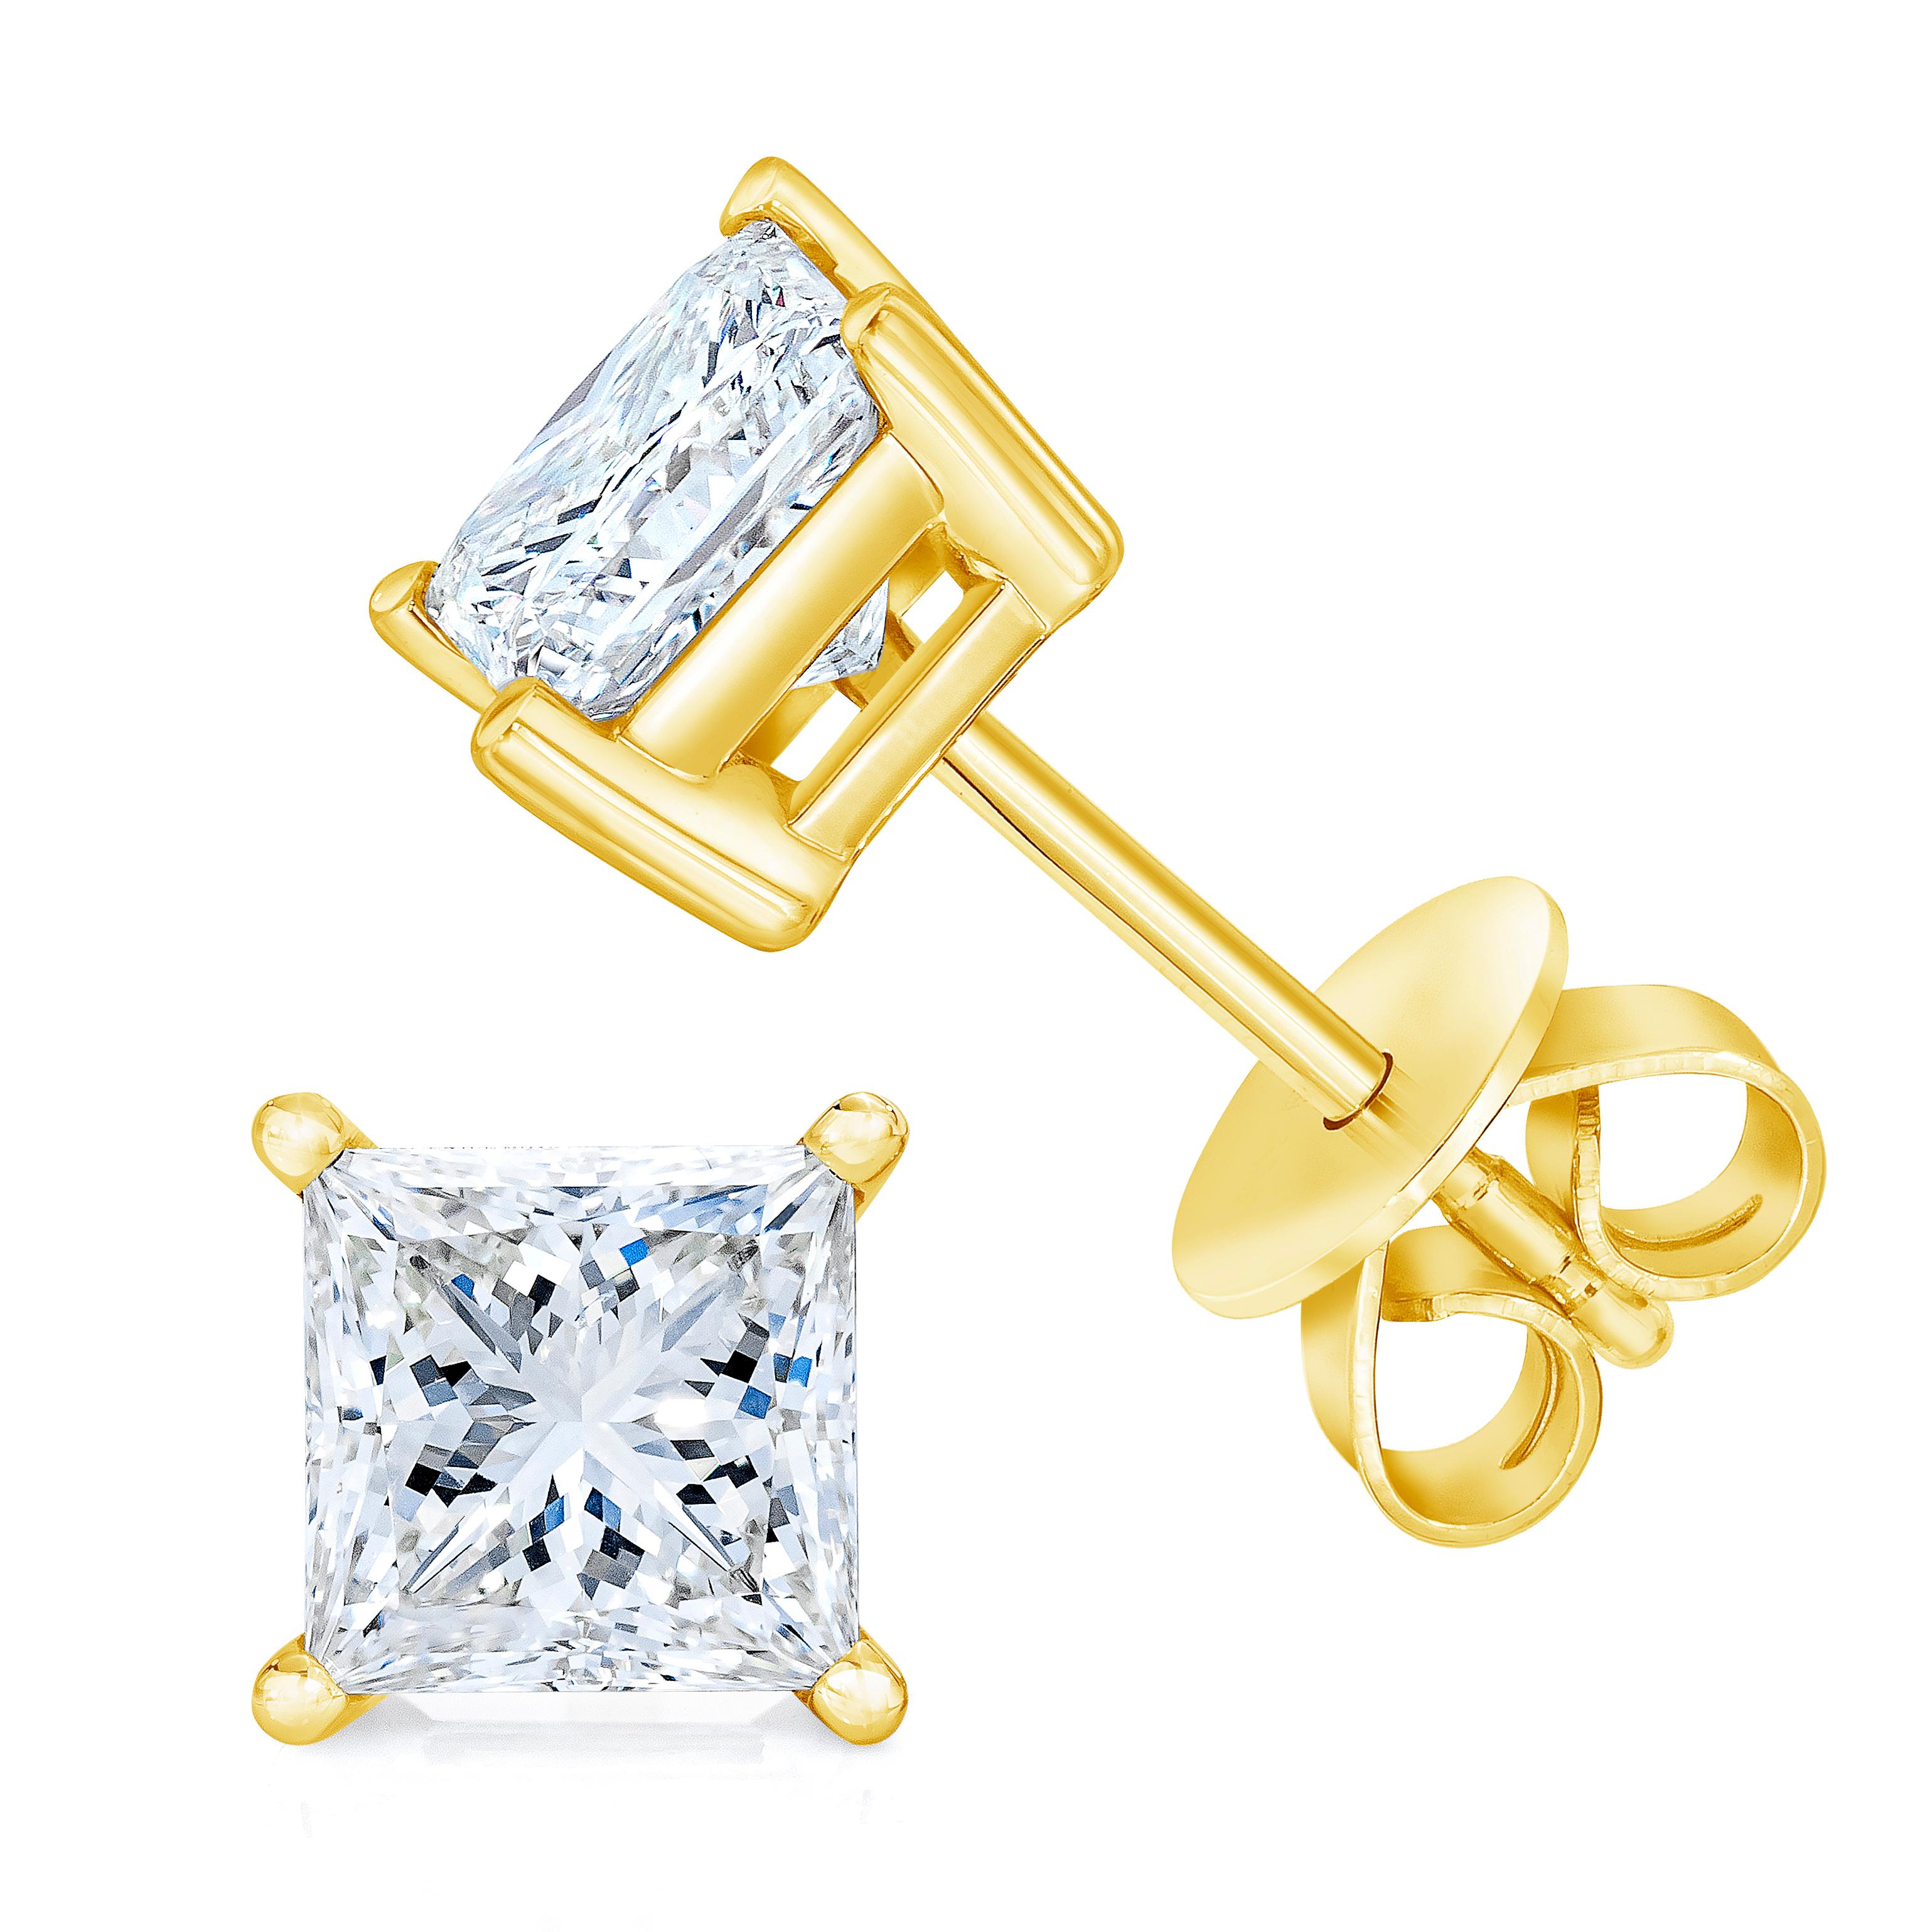 Celebrate any occasion with these classic shimmering diamond stud earrings. Crafted from 14k Yellow Gold each earring showcases a sparkling Princess-Cut Solitaire Diamond in a 4-Prong Setting. Dazzling with 3/8 cttw of diamonds and a bright polished